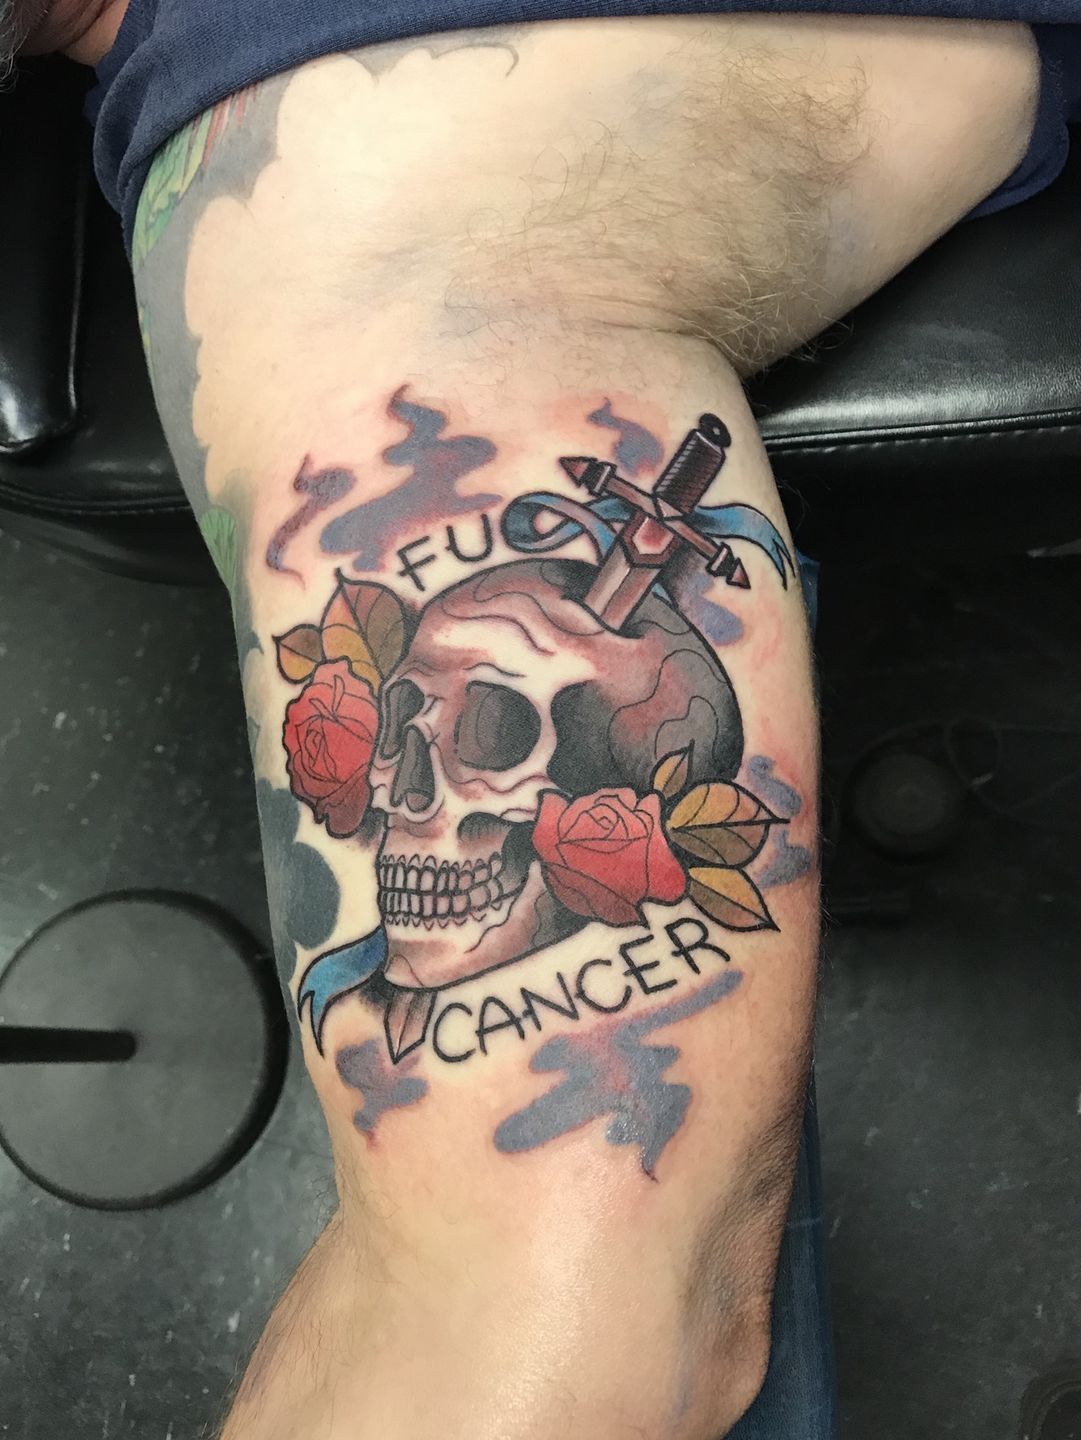 Can Tattoos Cause Cancer The Health Risks of Inking